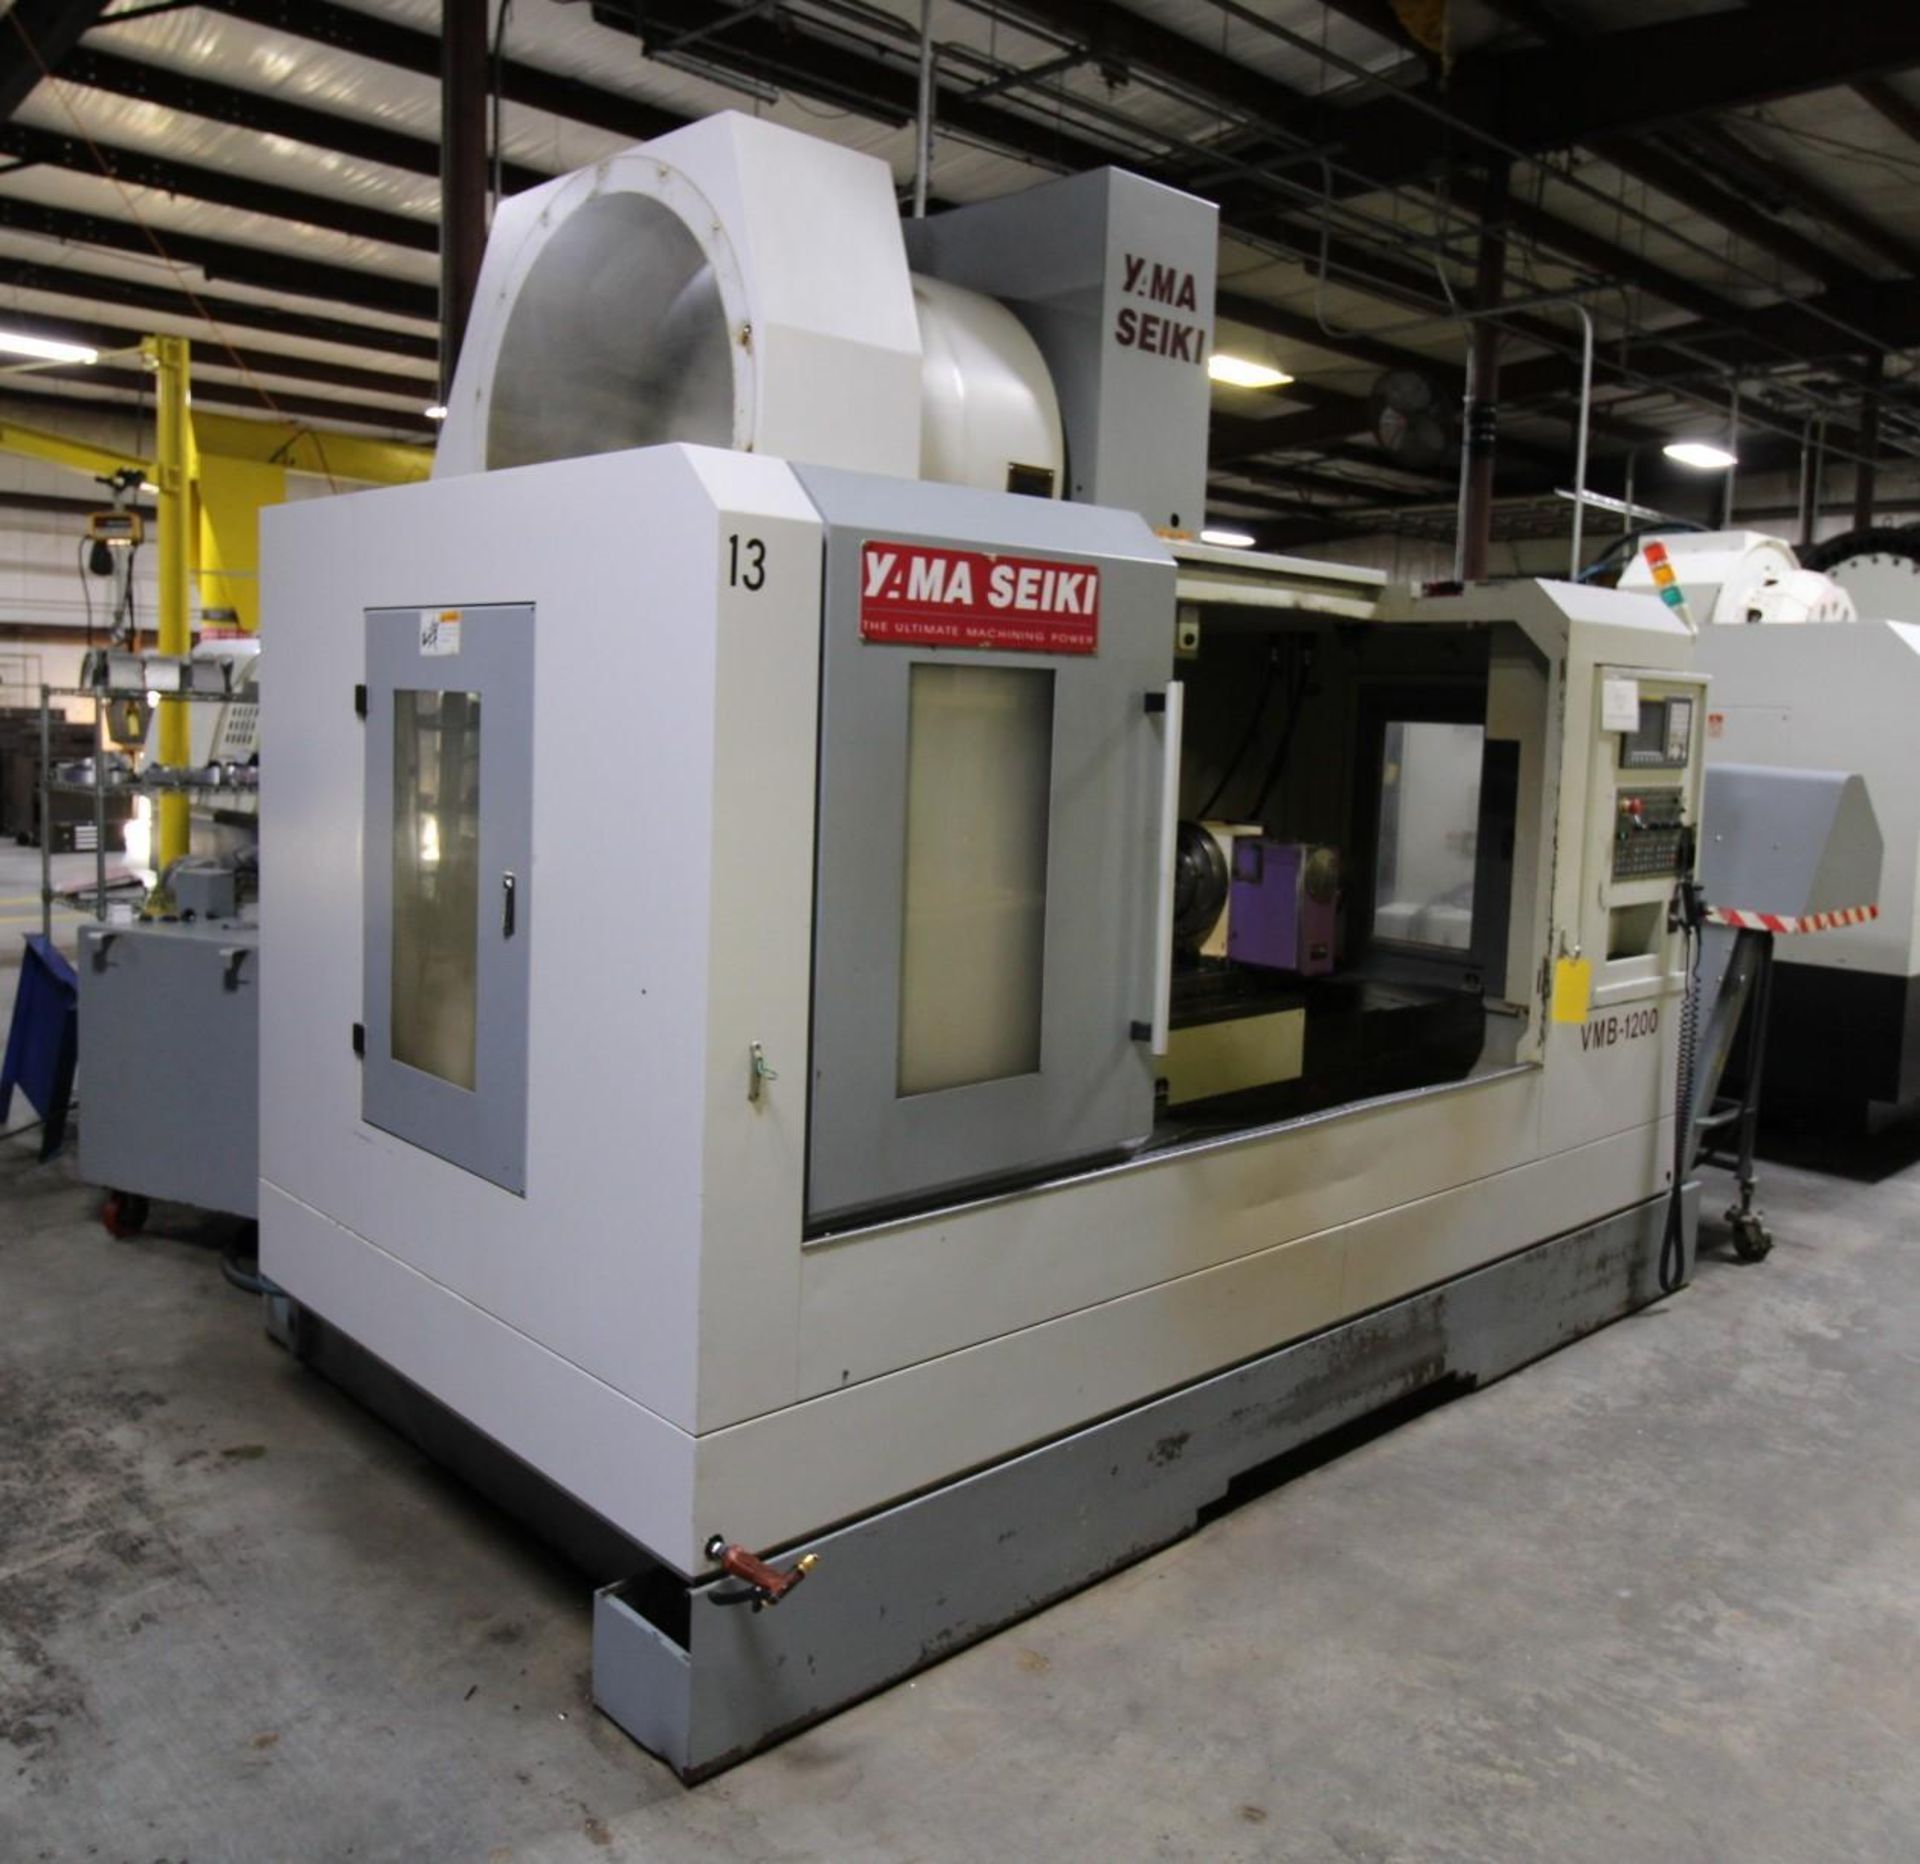 4-AXIS VERTICAL MACHINING CENTER, YAMA SEIKI MDL. VMB-1200, new 2006, installed new 2007, Fanuc Oi- - Image 2 of 17